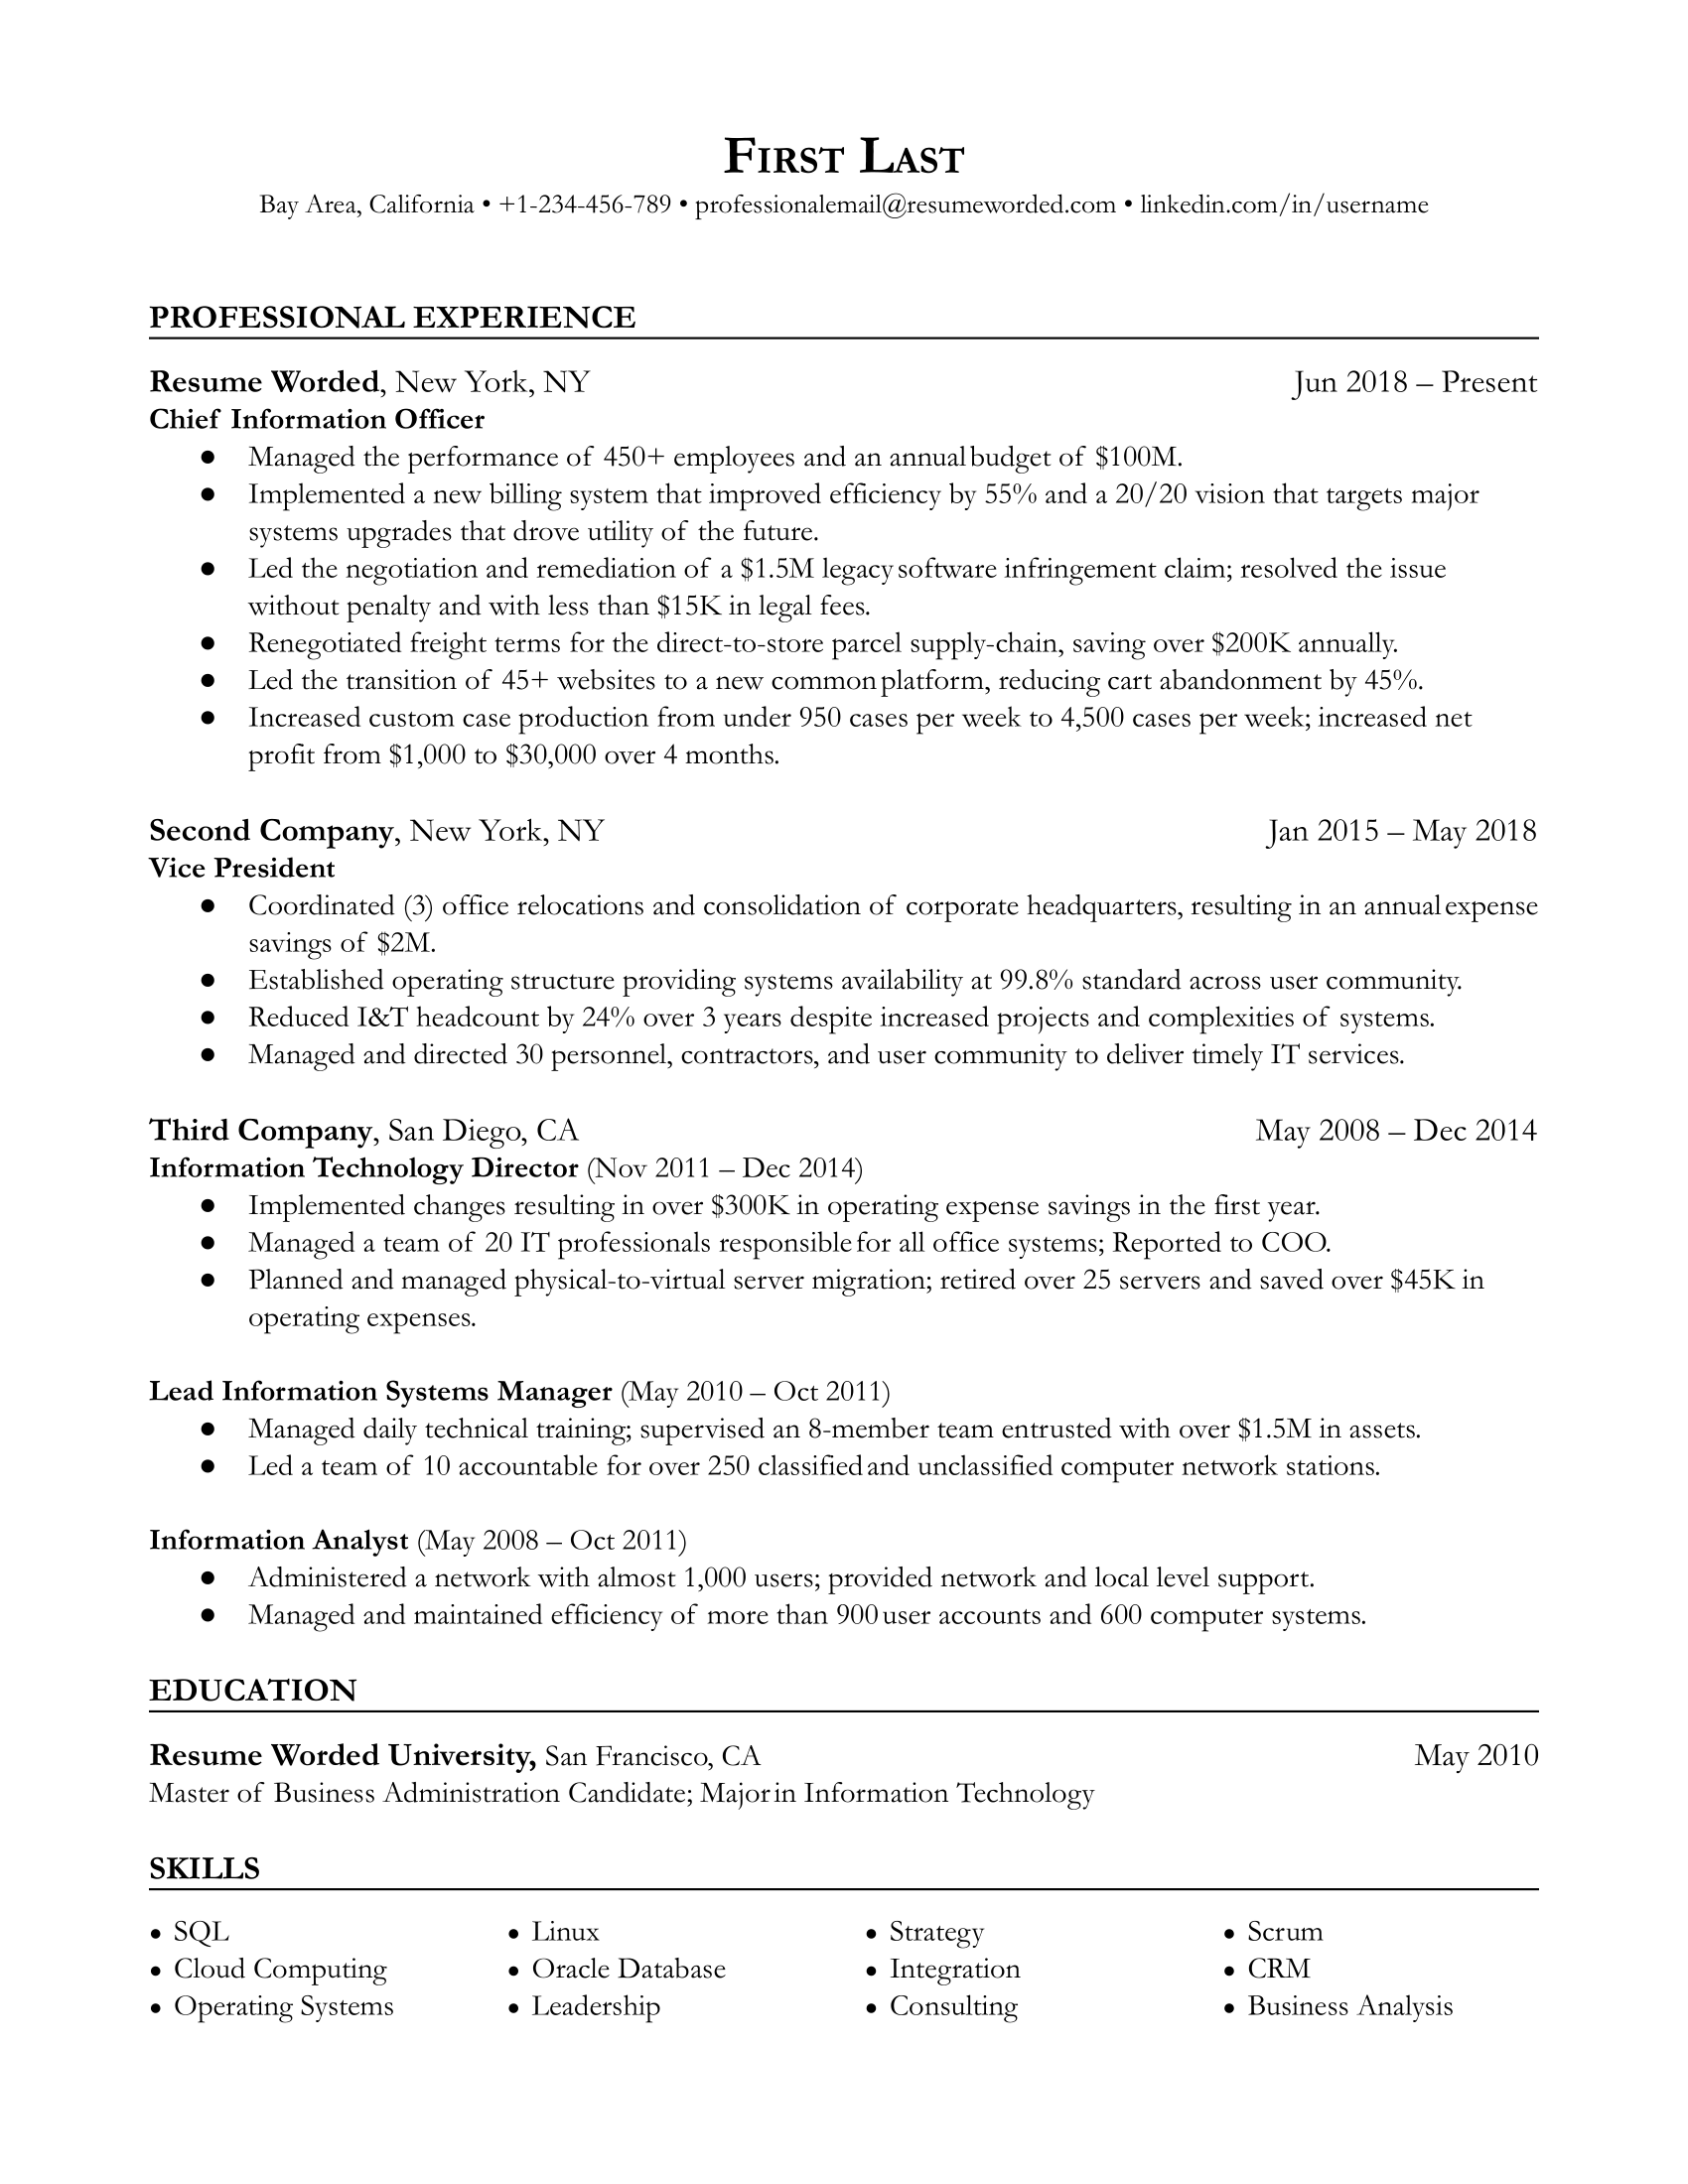 Chief Information Officer resume template example using metrics to illustrate recent achievements